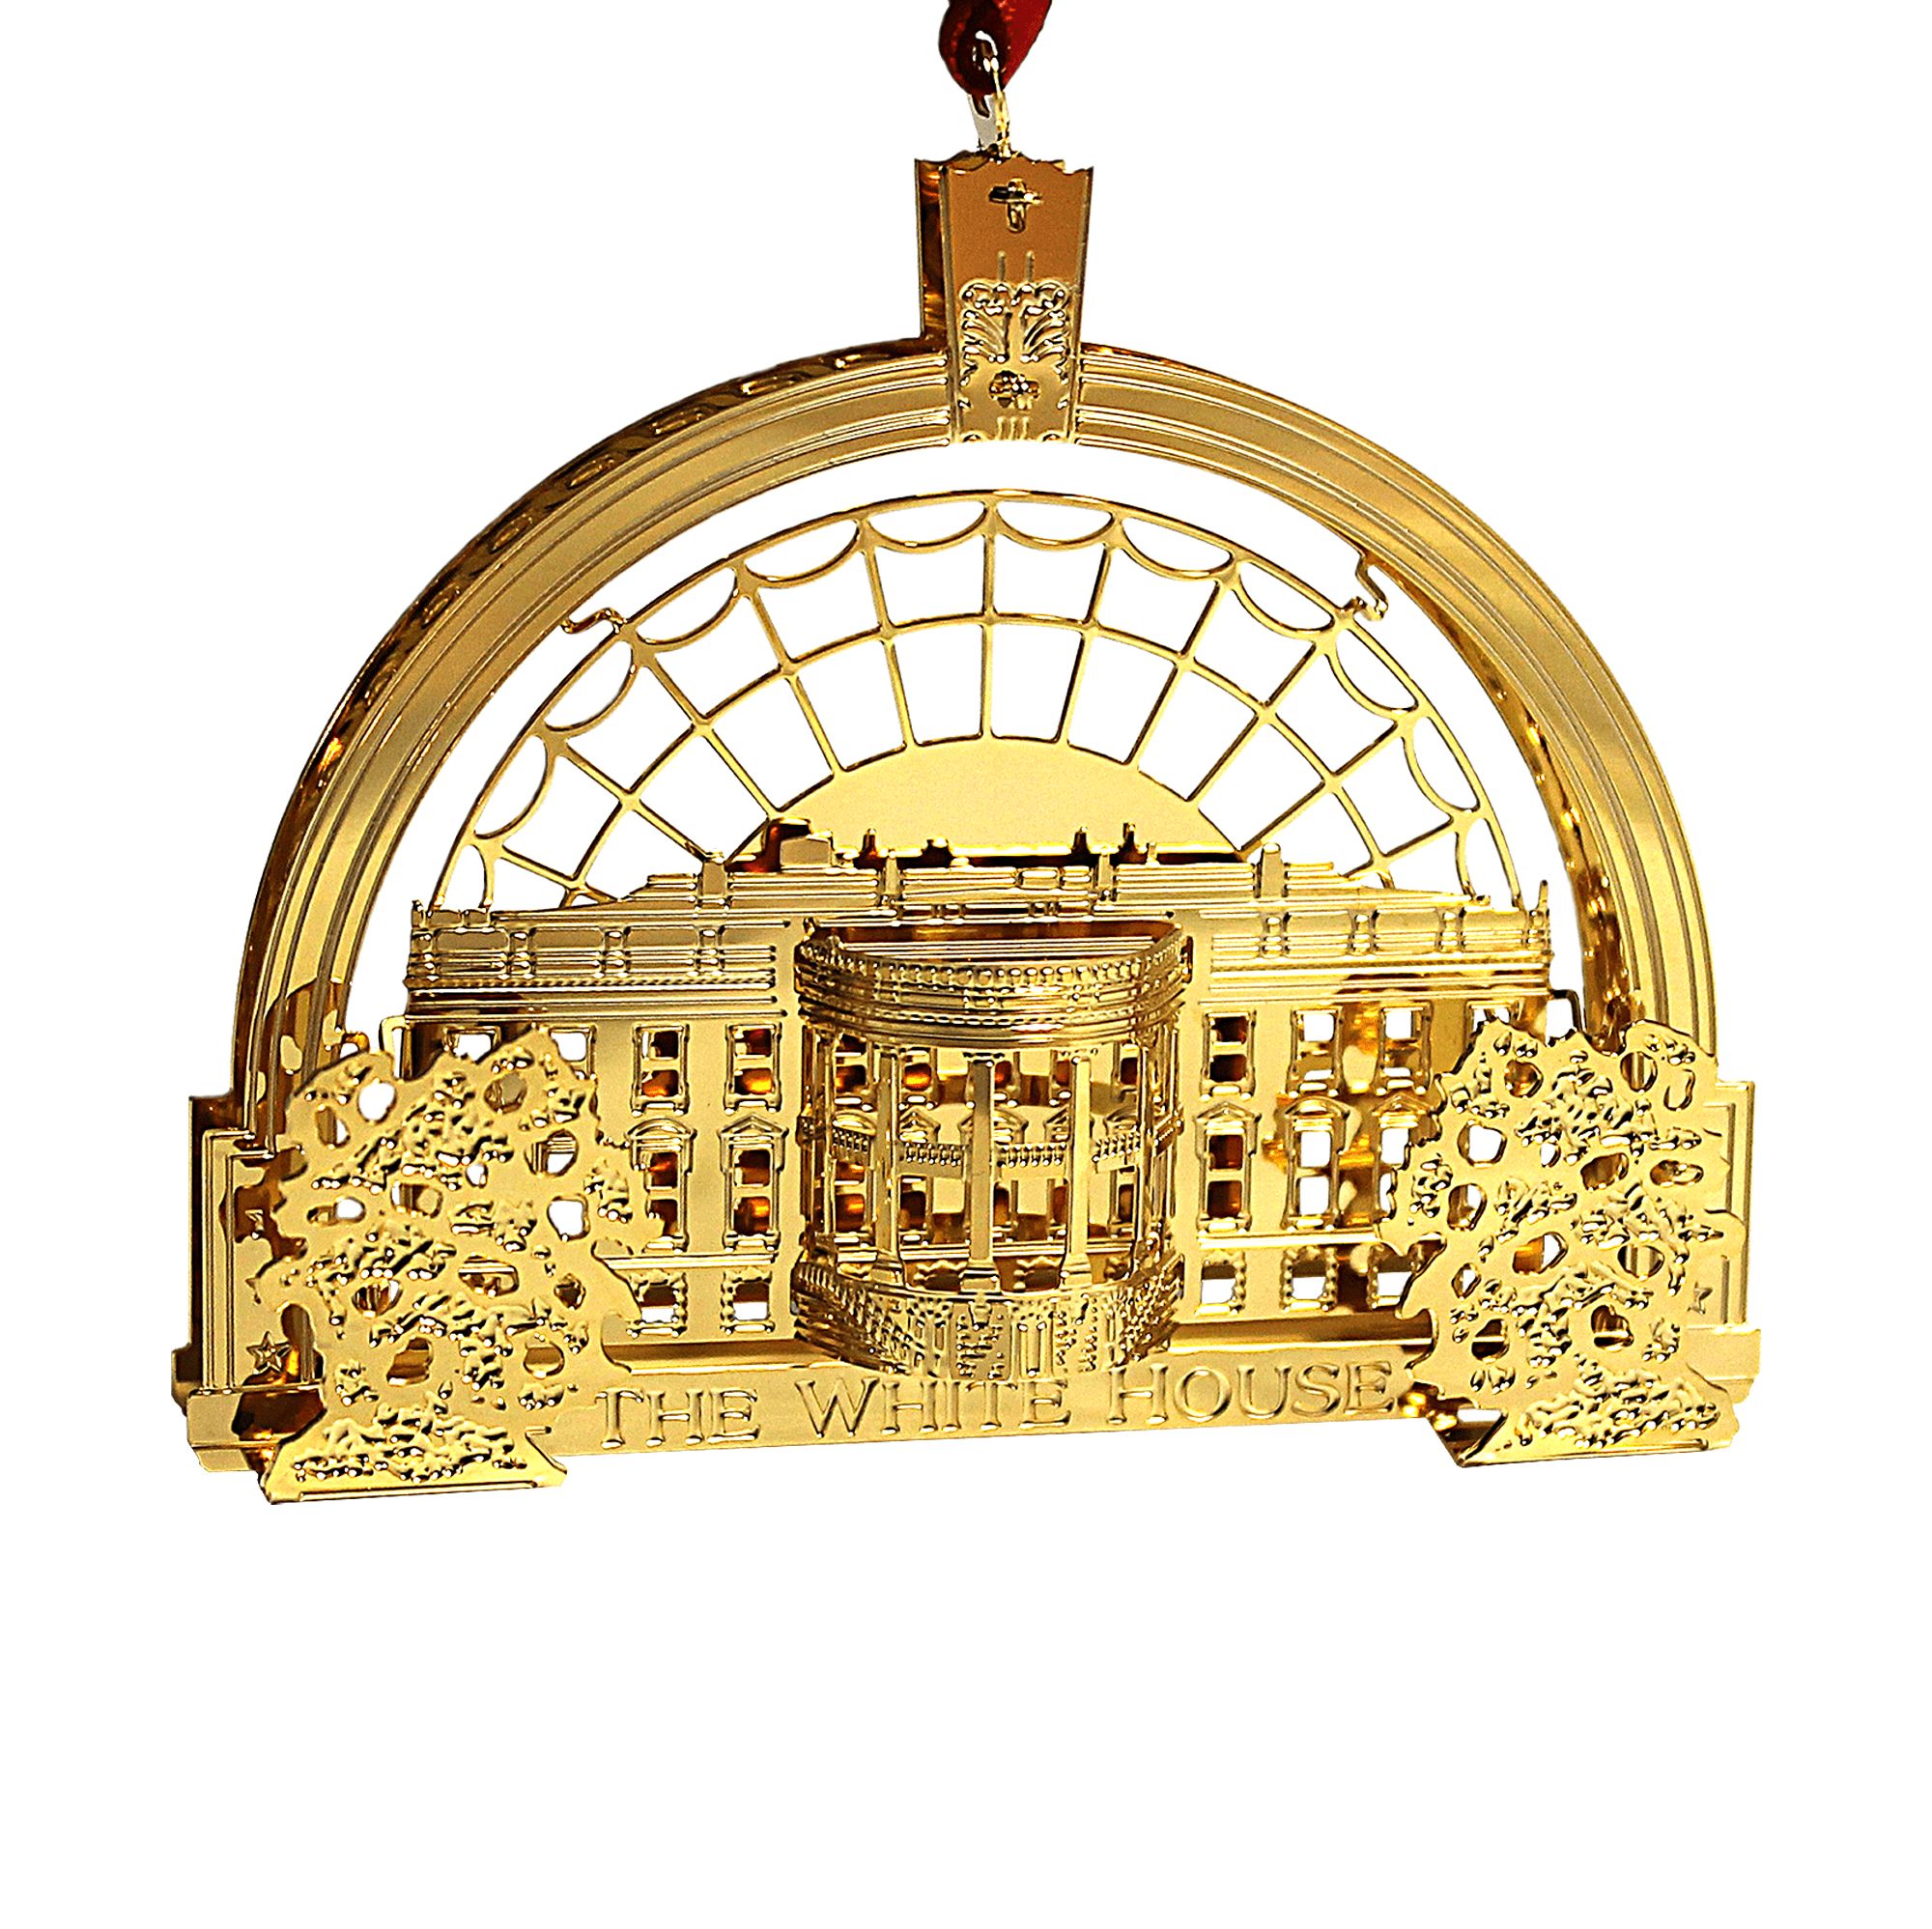 3-D Brass Ornament Finished in 24K Gold